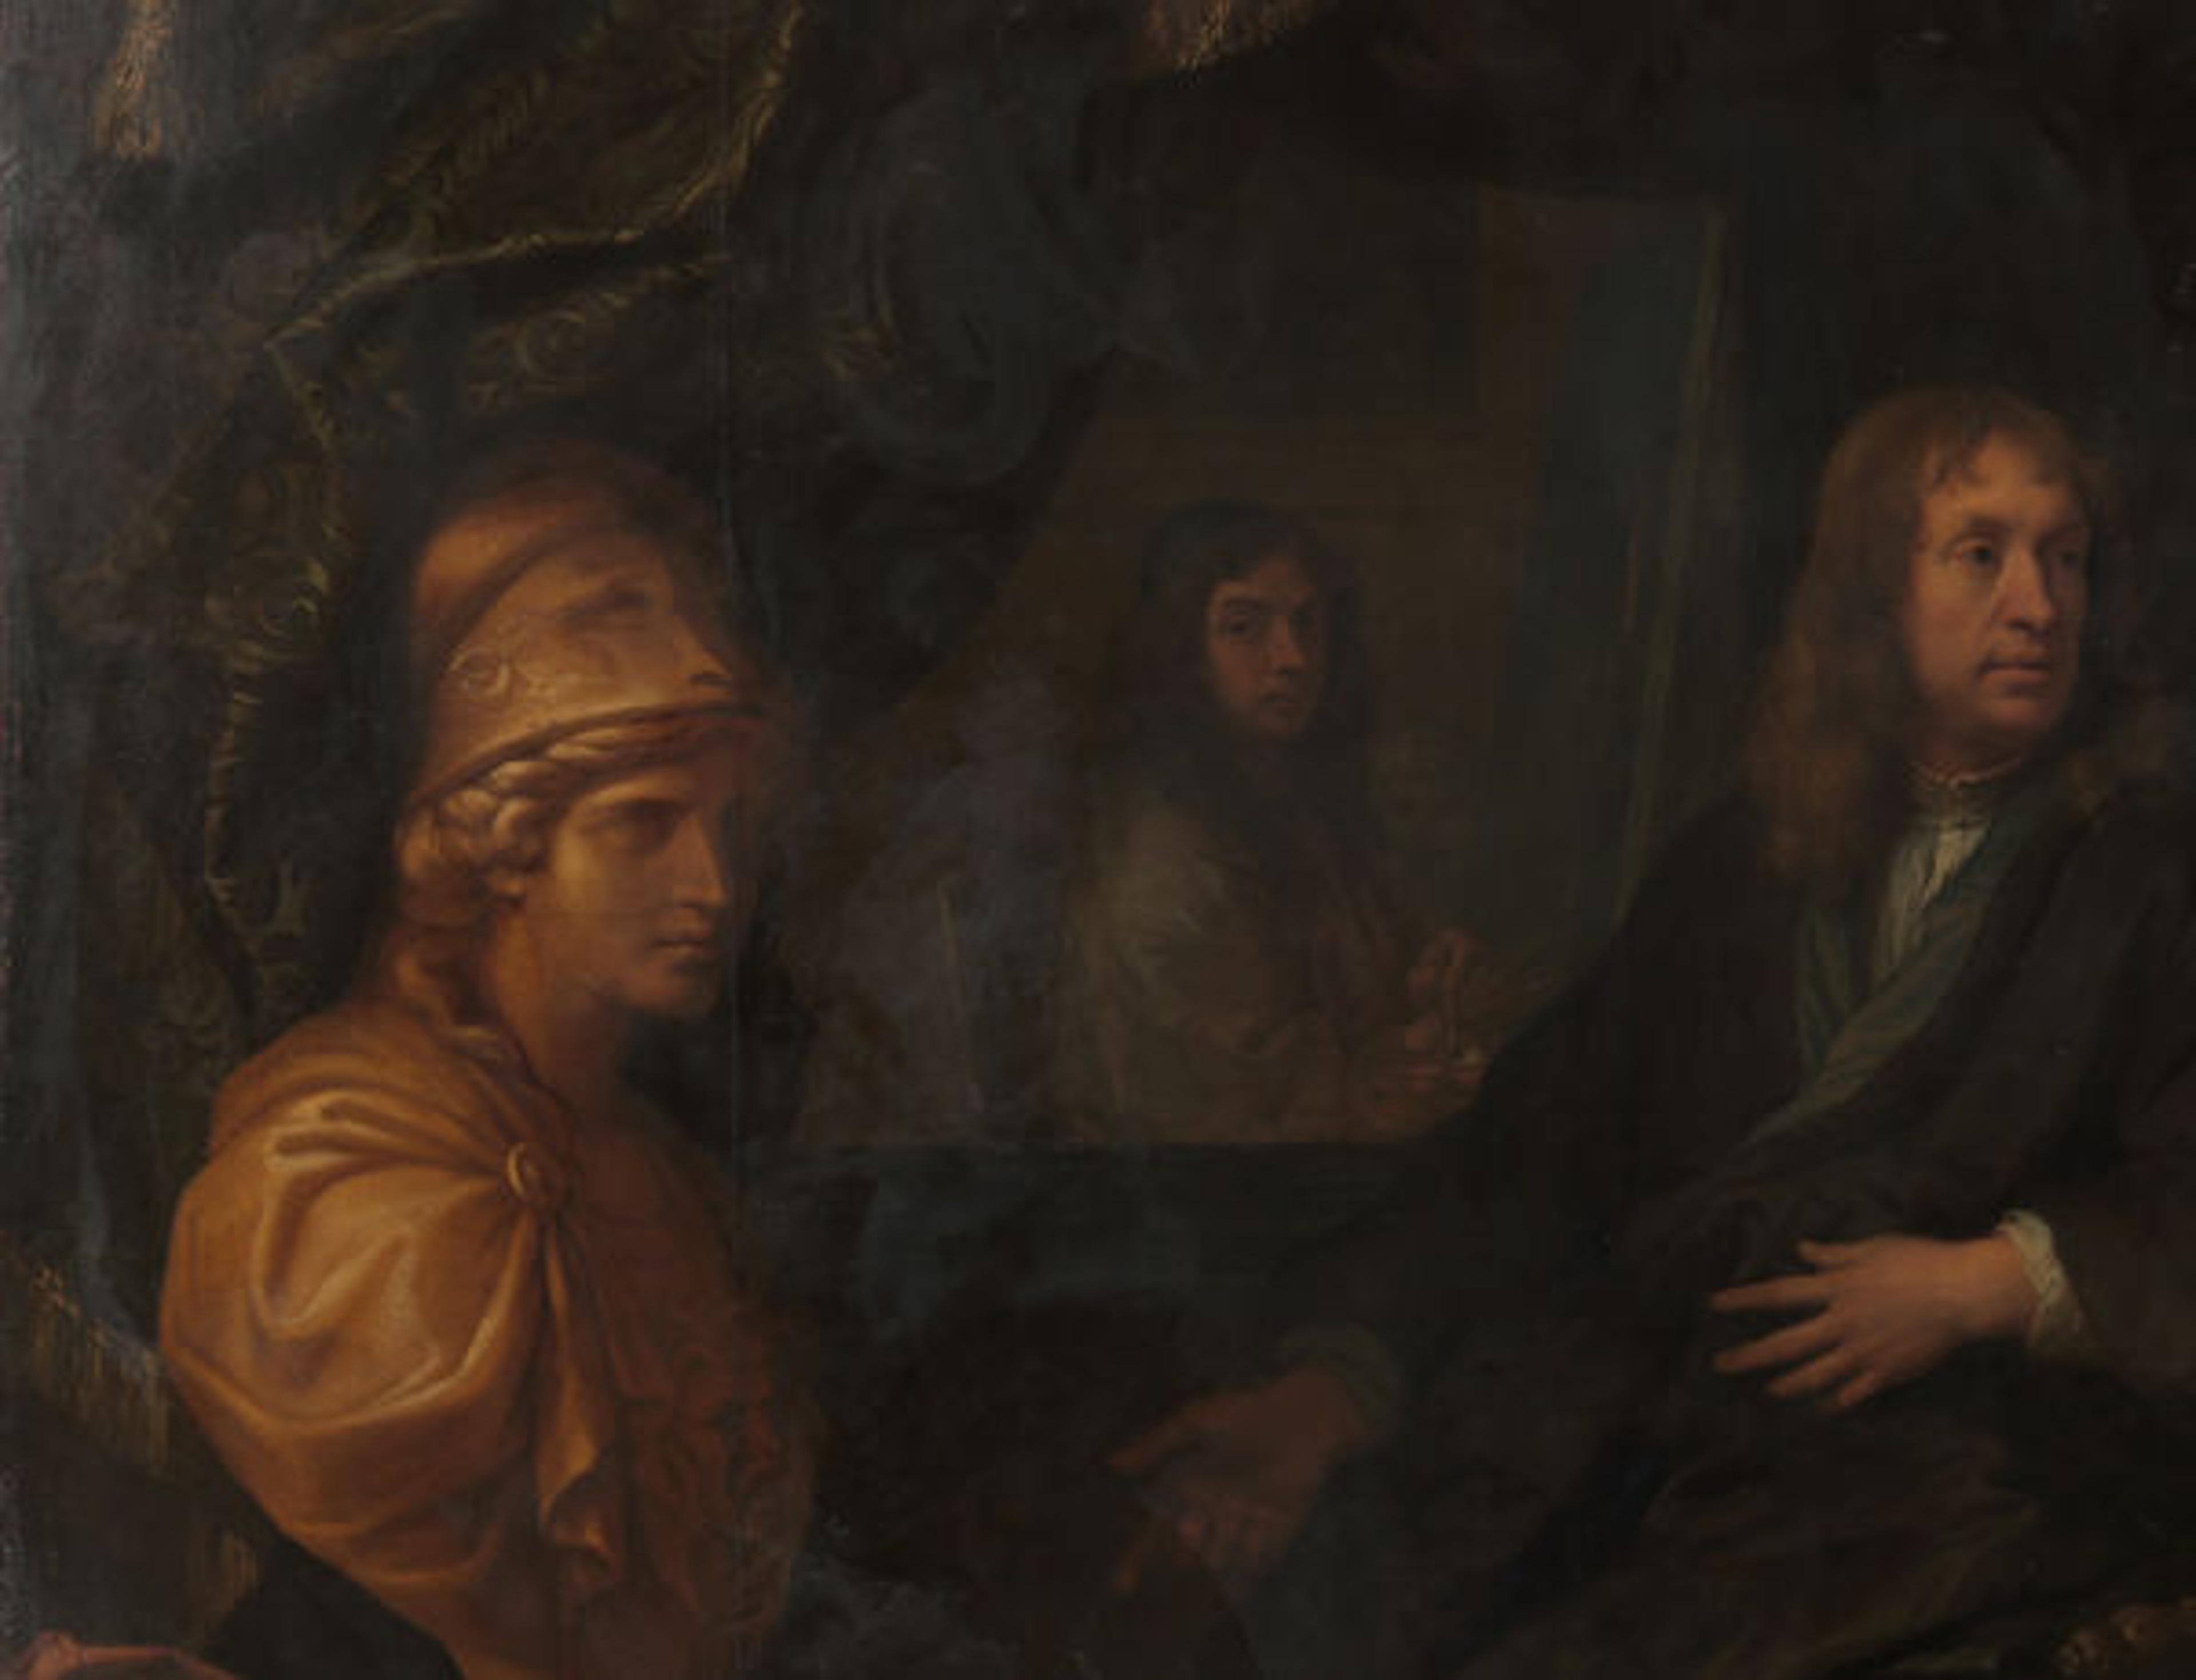 Detail of Le Brun in the mirror